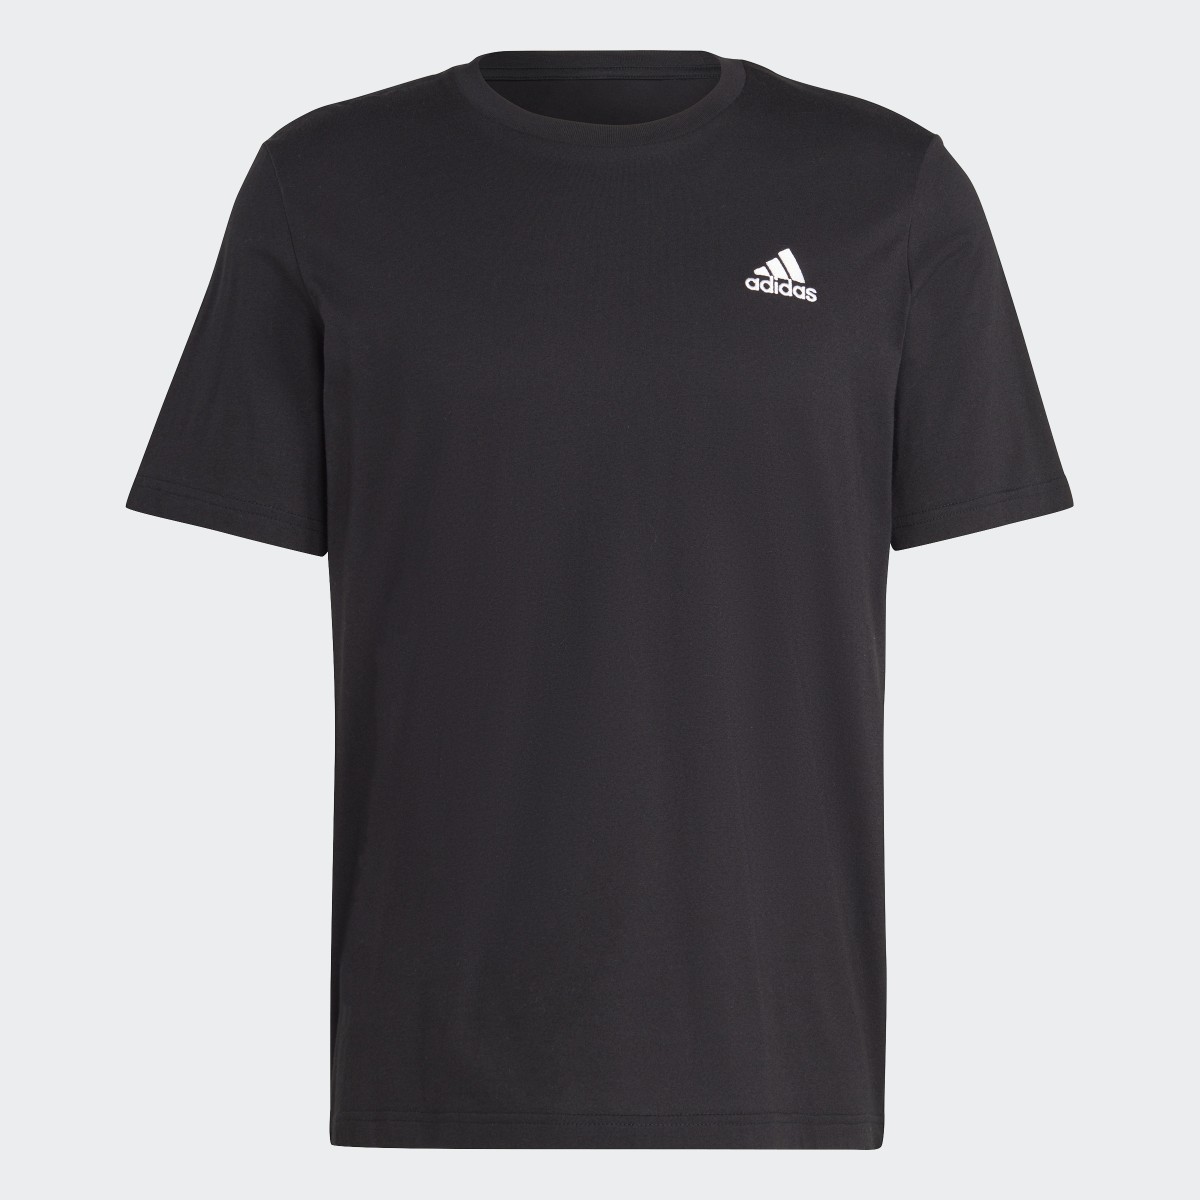 Adidas T-shirt Essentials Single Jersey Embroidered Small Logo. 5